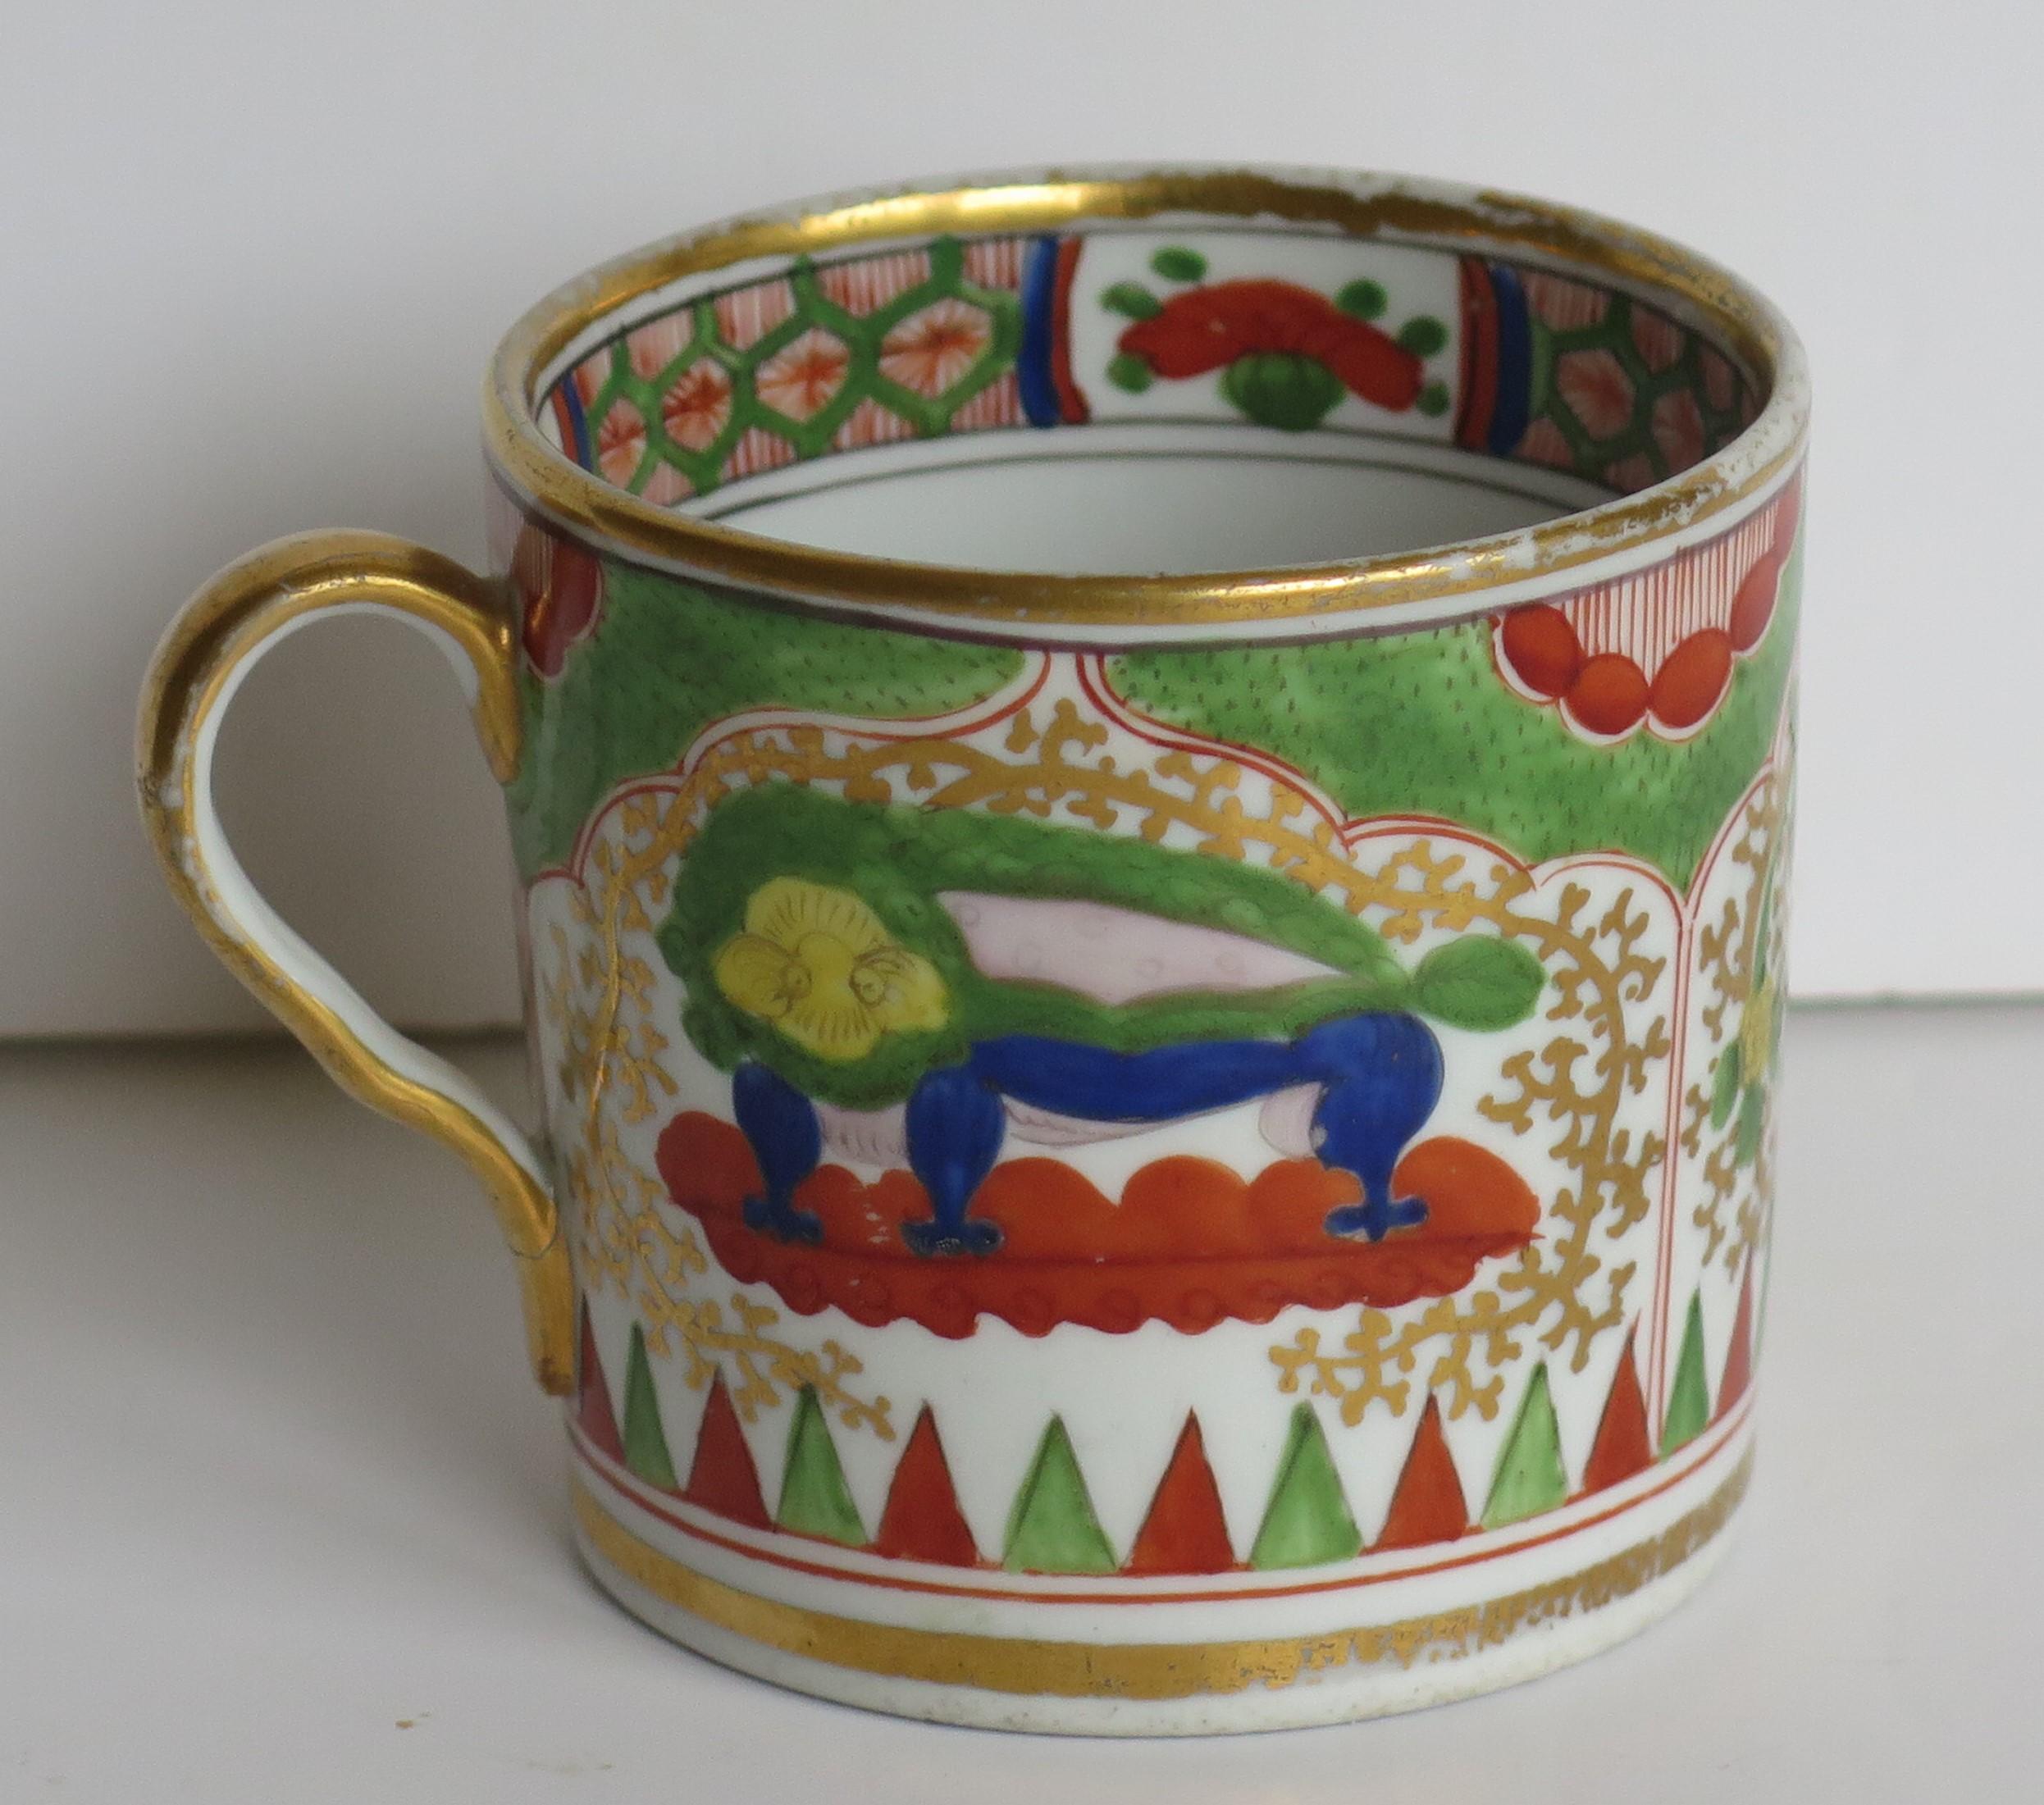 This is a good quality coffee can that we attribute to the Coalport porcelain works, Shropshire, England, made during the John Rose period of the George 111rd years, circa 1805-1810.

The coffee can is nominally parallel, tapering slightly to the